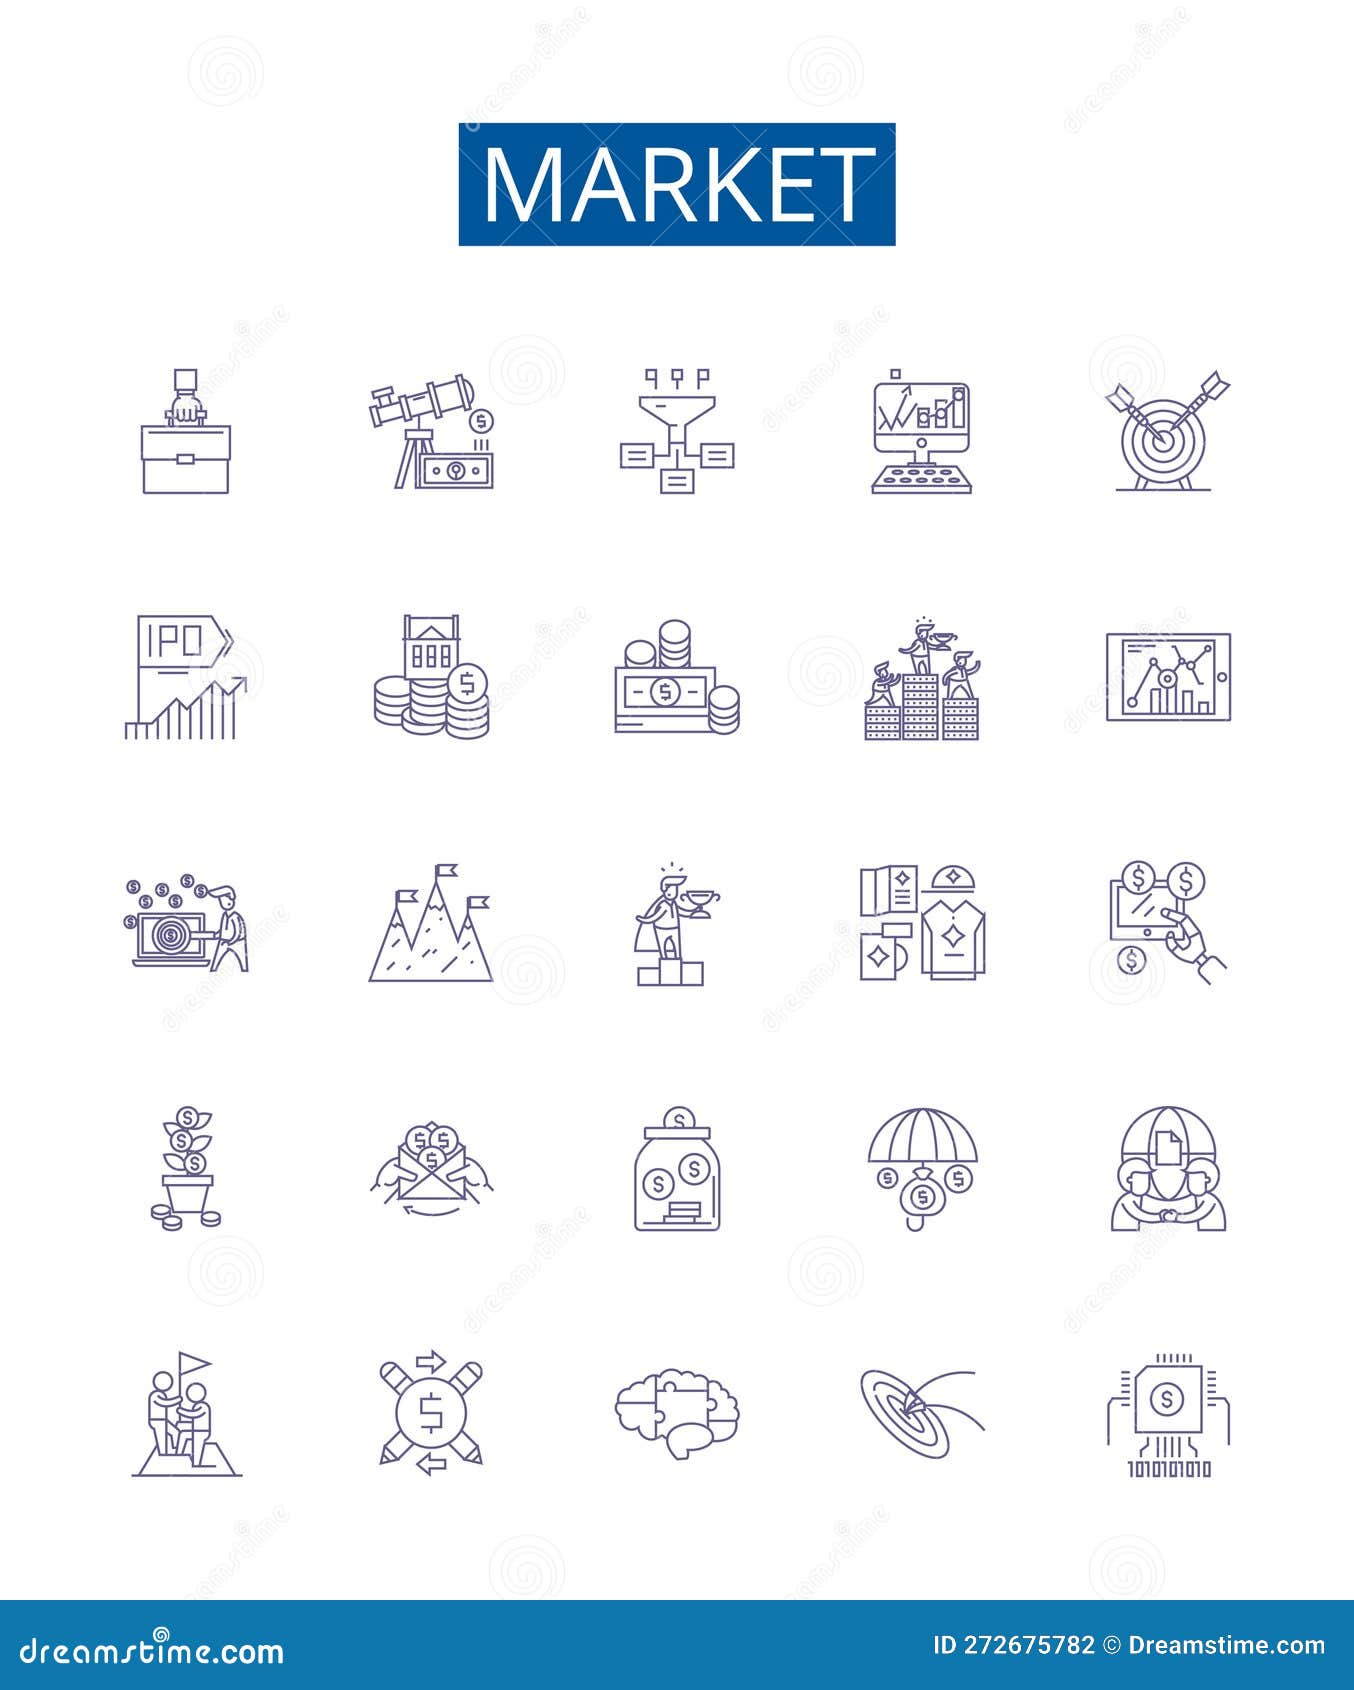 market line icons signs set.  collection of market, trade, shopping, retail, bazaar, vend, exchange, commercial